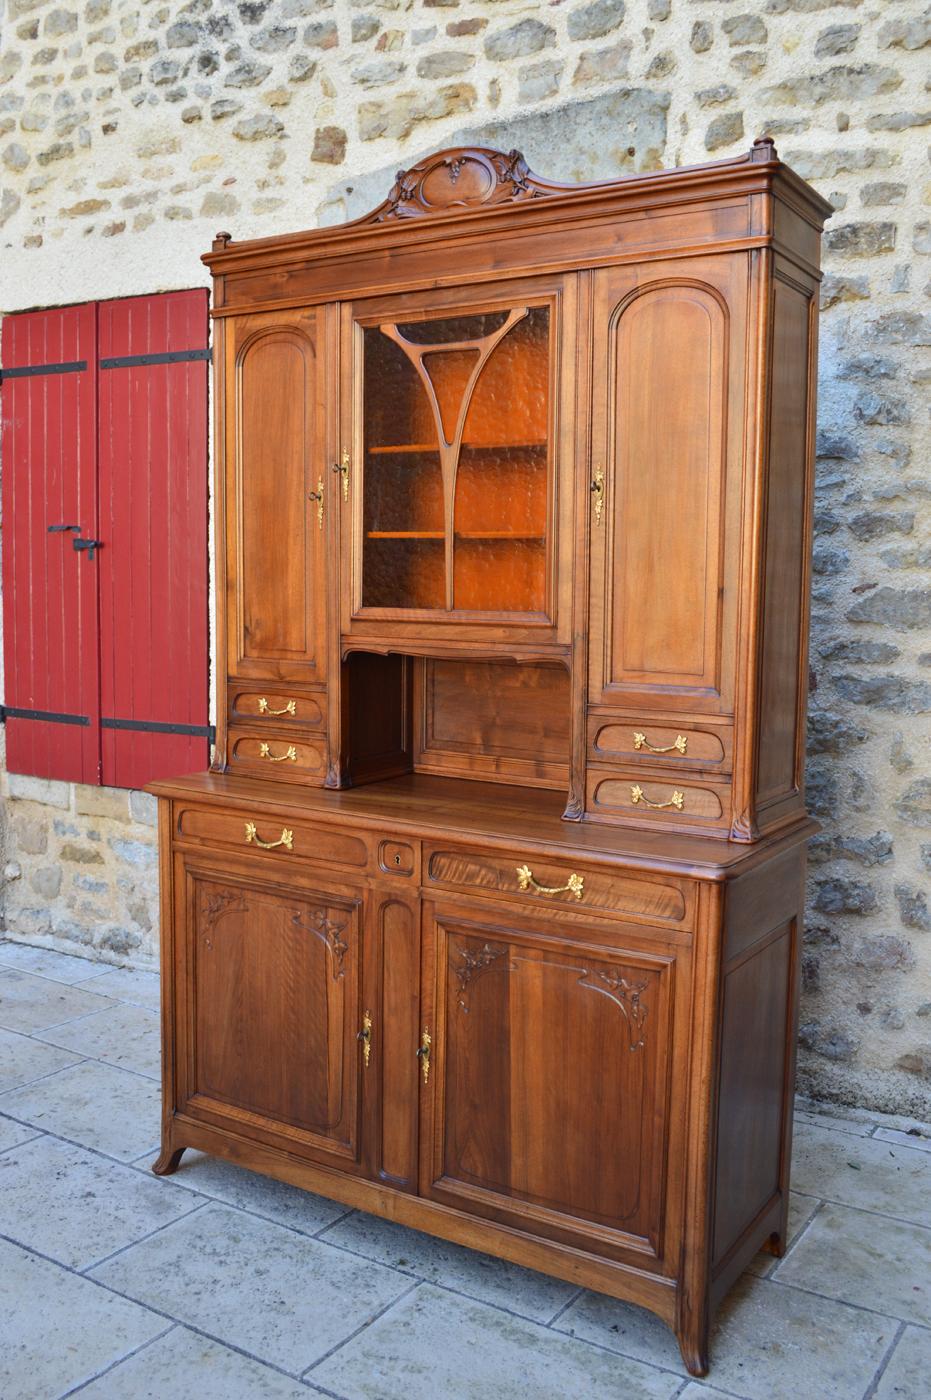 Superb buffet 2 bodies / dresser composed of:

- in the upper part: 4 small drawers, 3 cupboards including a cathedral glass door, and a nicely carved pediment;
- in the lower part: 2 large drawers and 1 large cupboard with double doors.

All